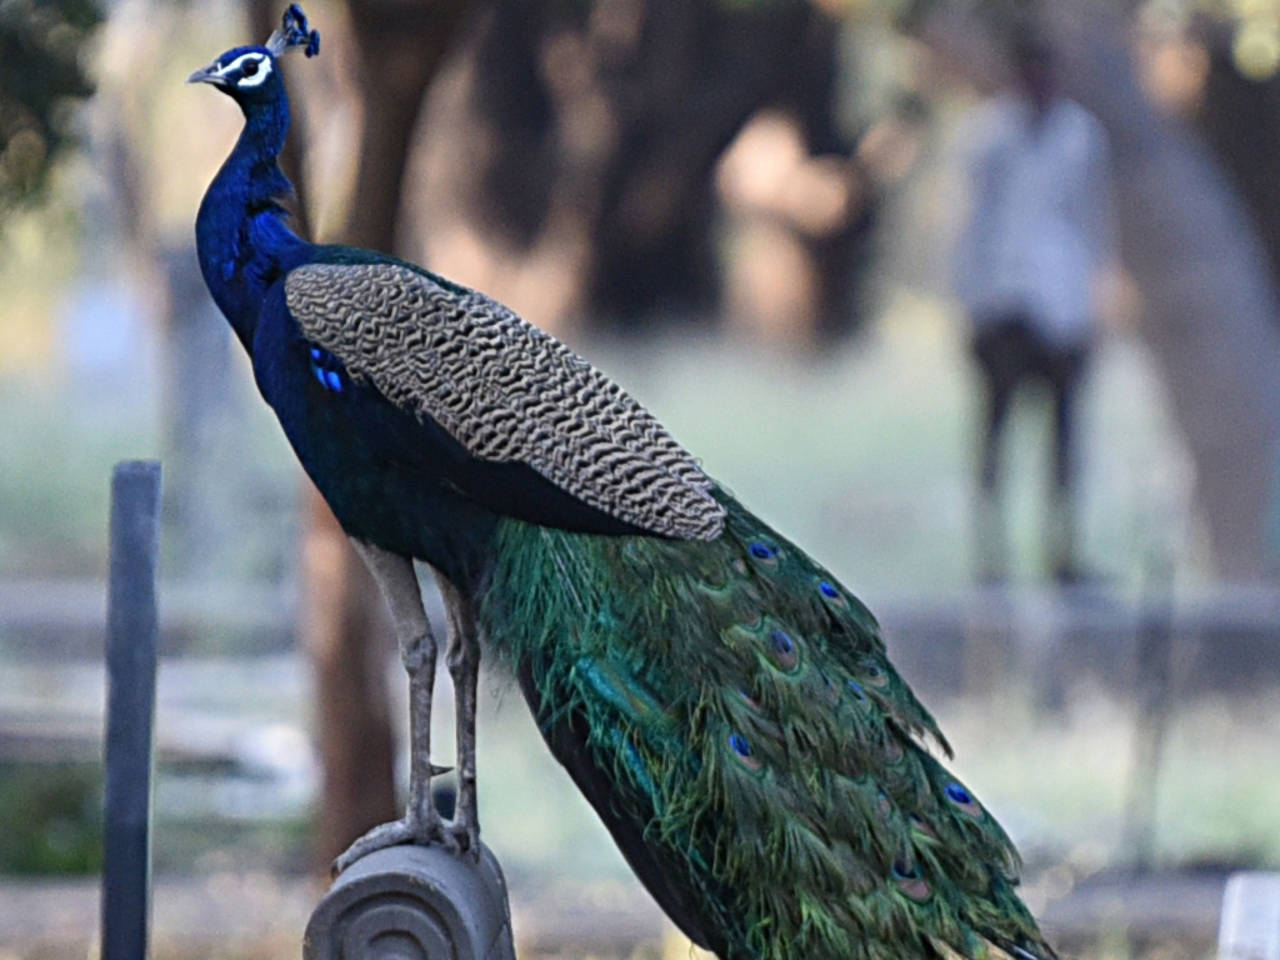 Tamil Nadu, a hotbed of peacock plume business | Chennai News ...